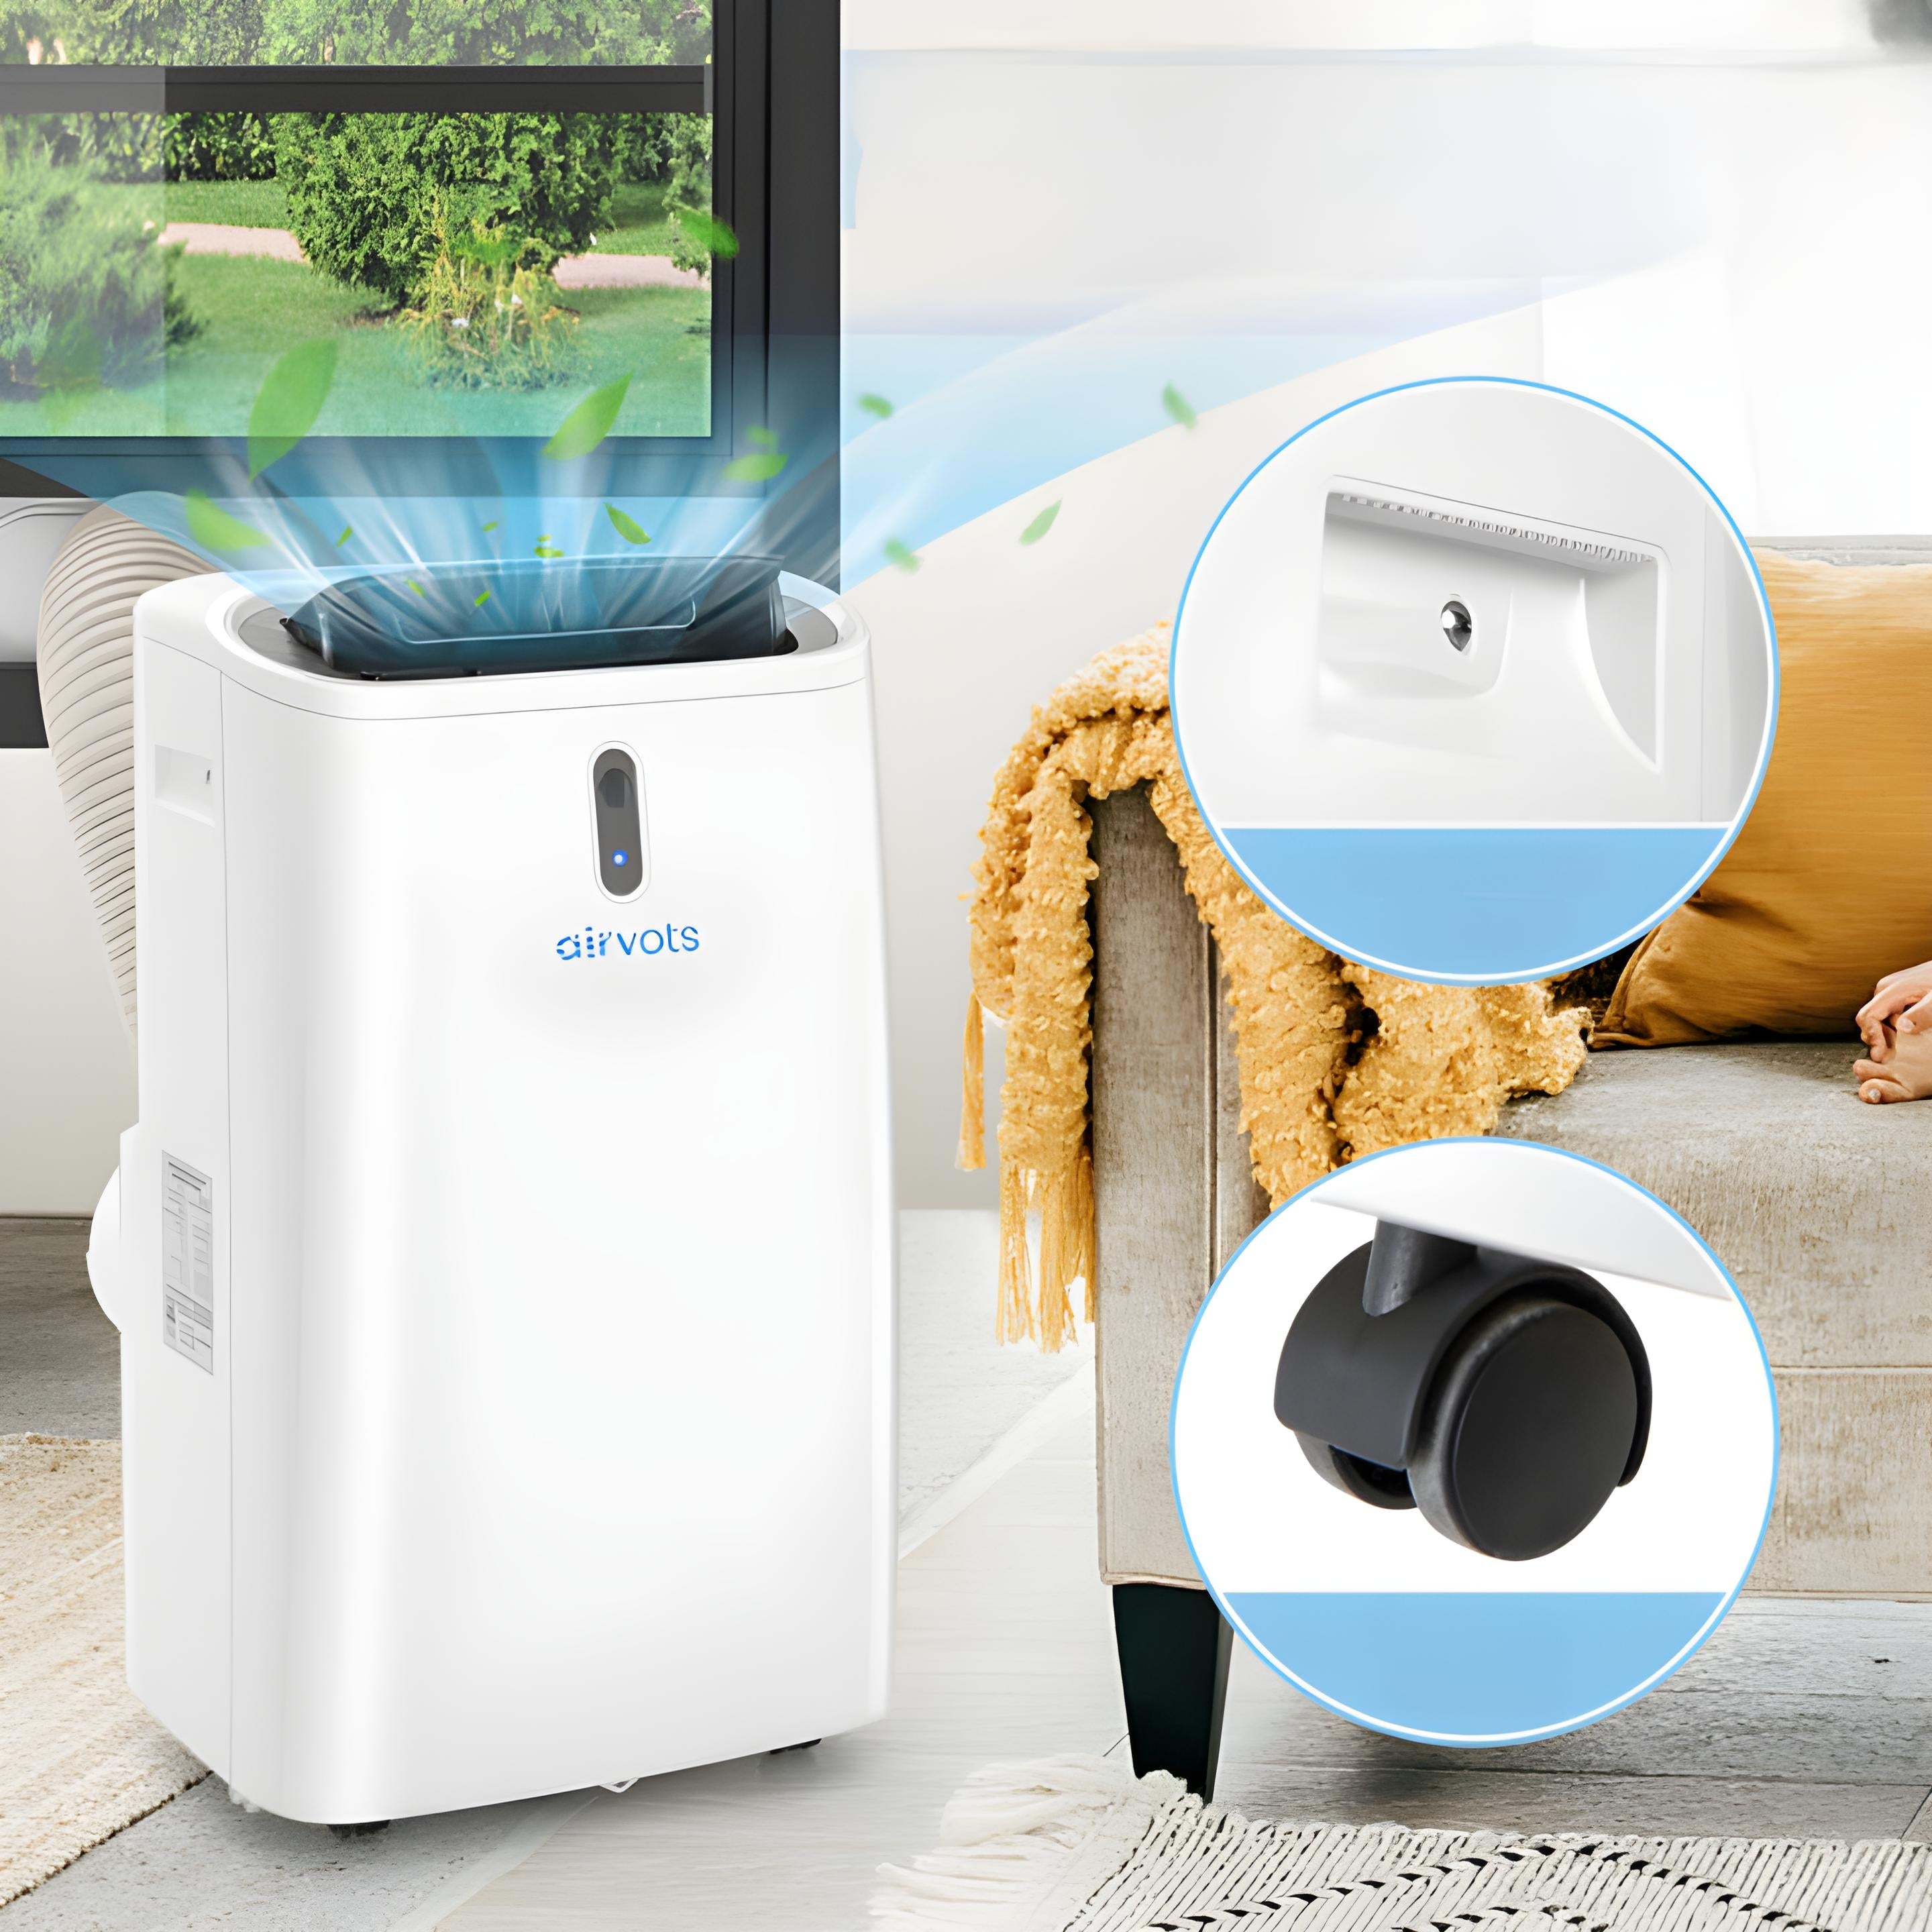 Airvots 14000 BTU(Ashrae) Portable Air Conditioner with APP and WiFi Control